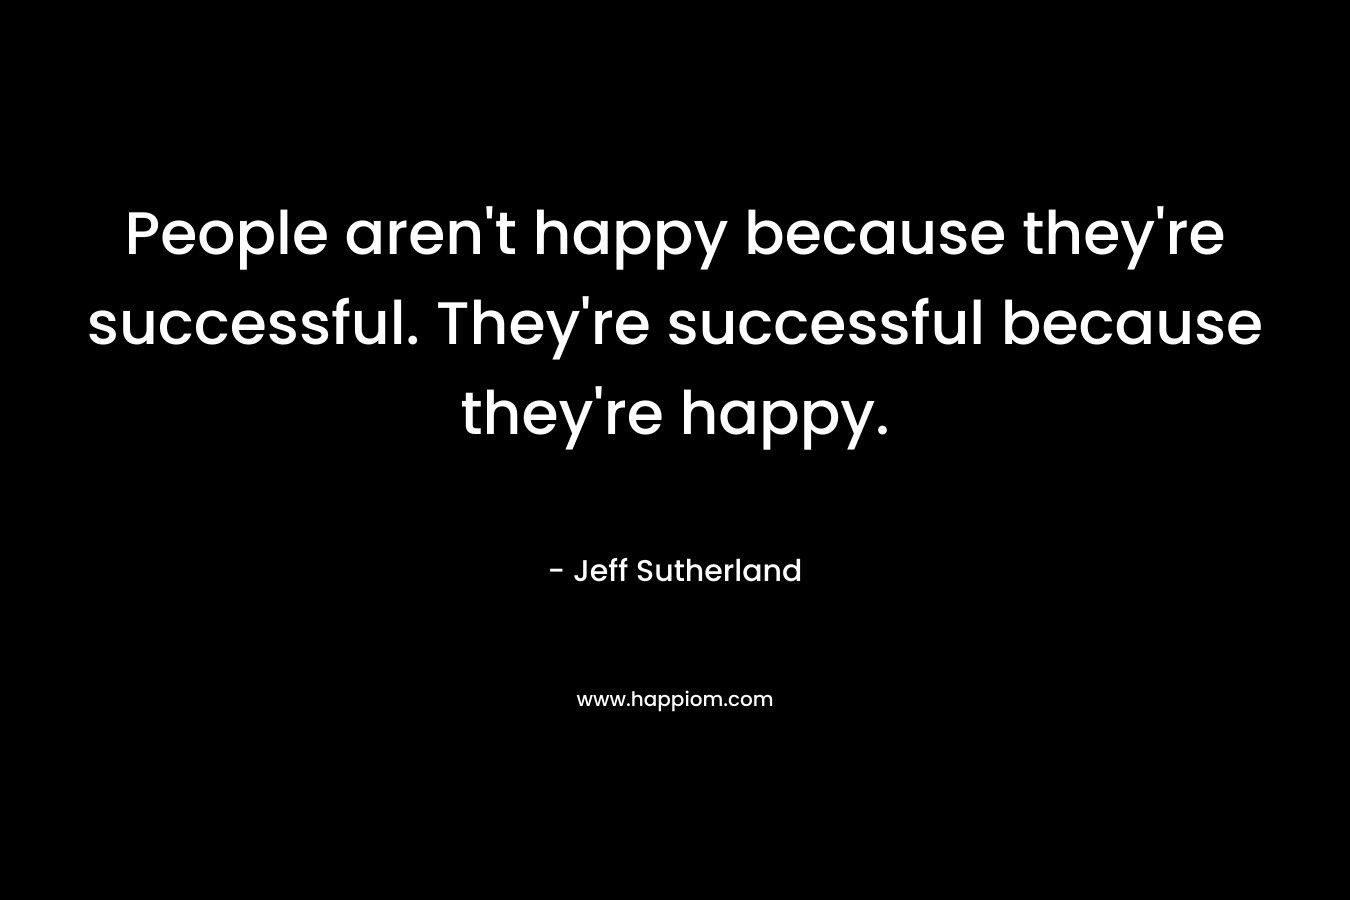 People aren't happy because they're successful. They're successful because they're happy.